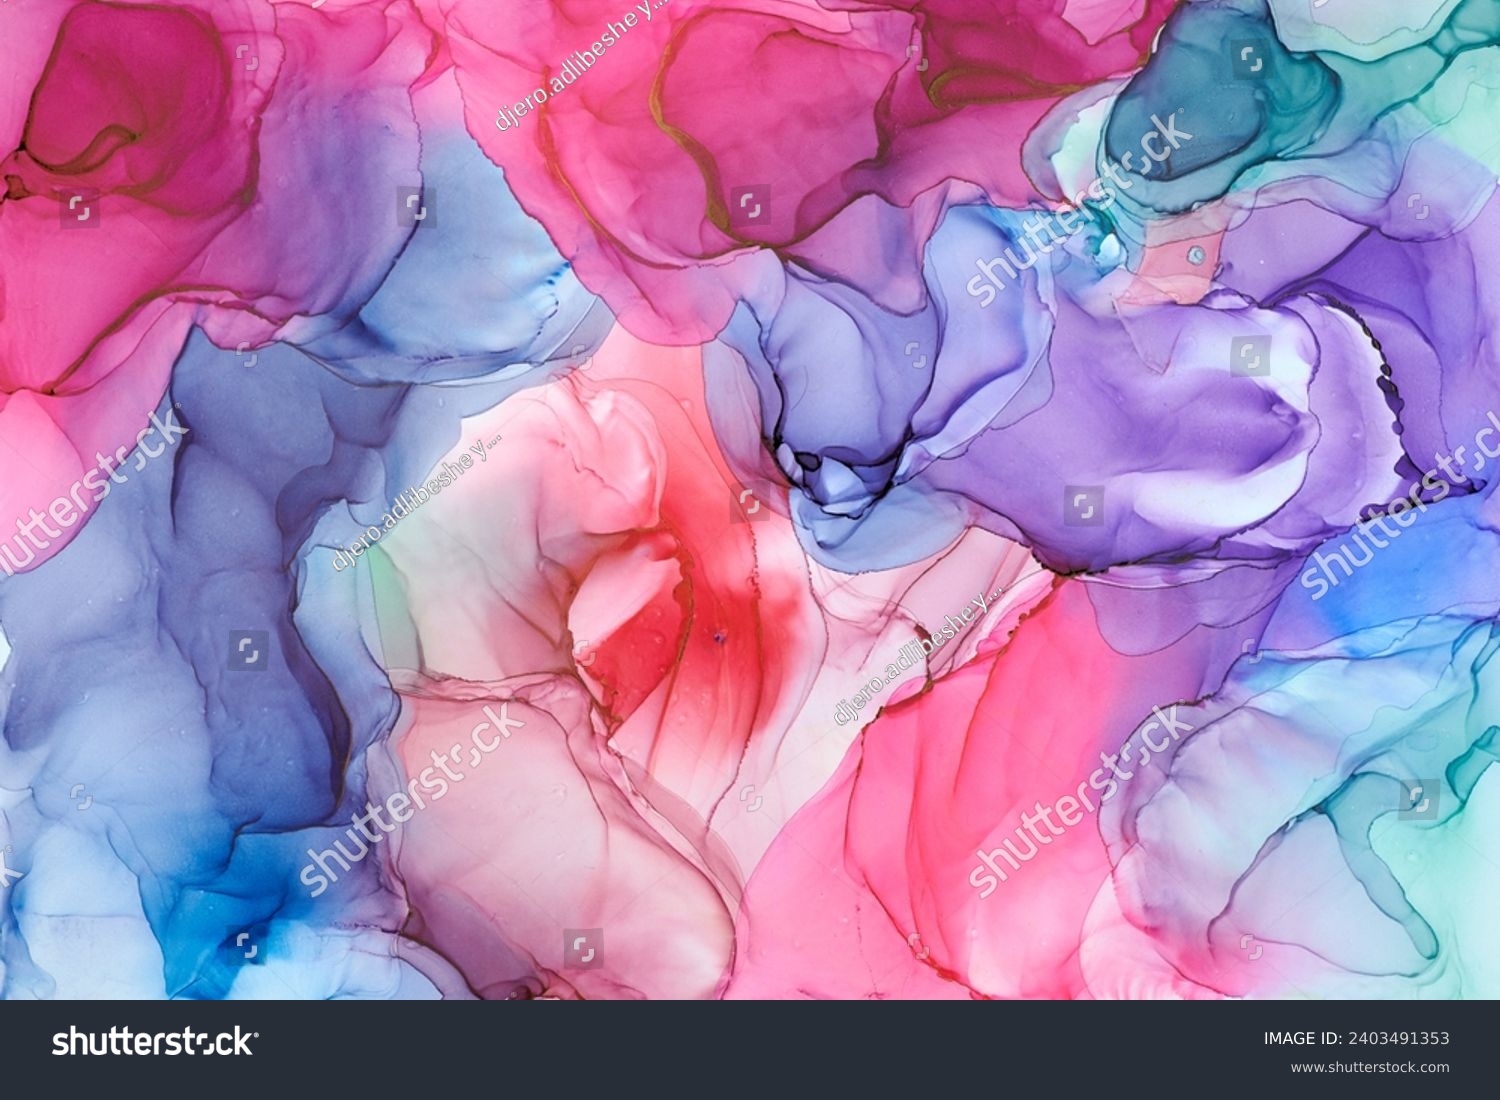 Natural  luxury abstract fluid art painting in alcohol ink technique. Tender and dreamy  wallpaper. Mixture of colors creating transparent waves and golden swirls. For posters, other printed materials #2403491353